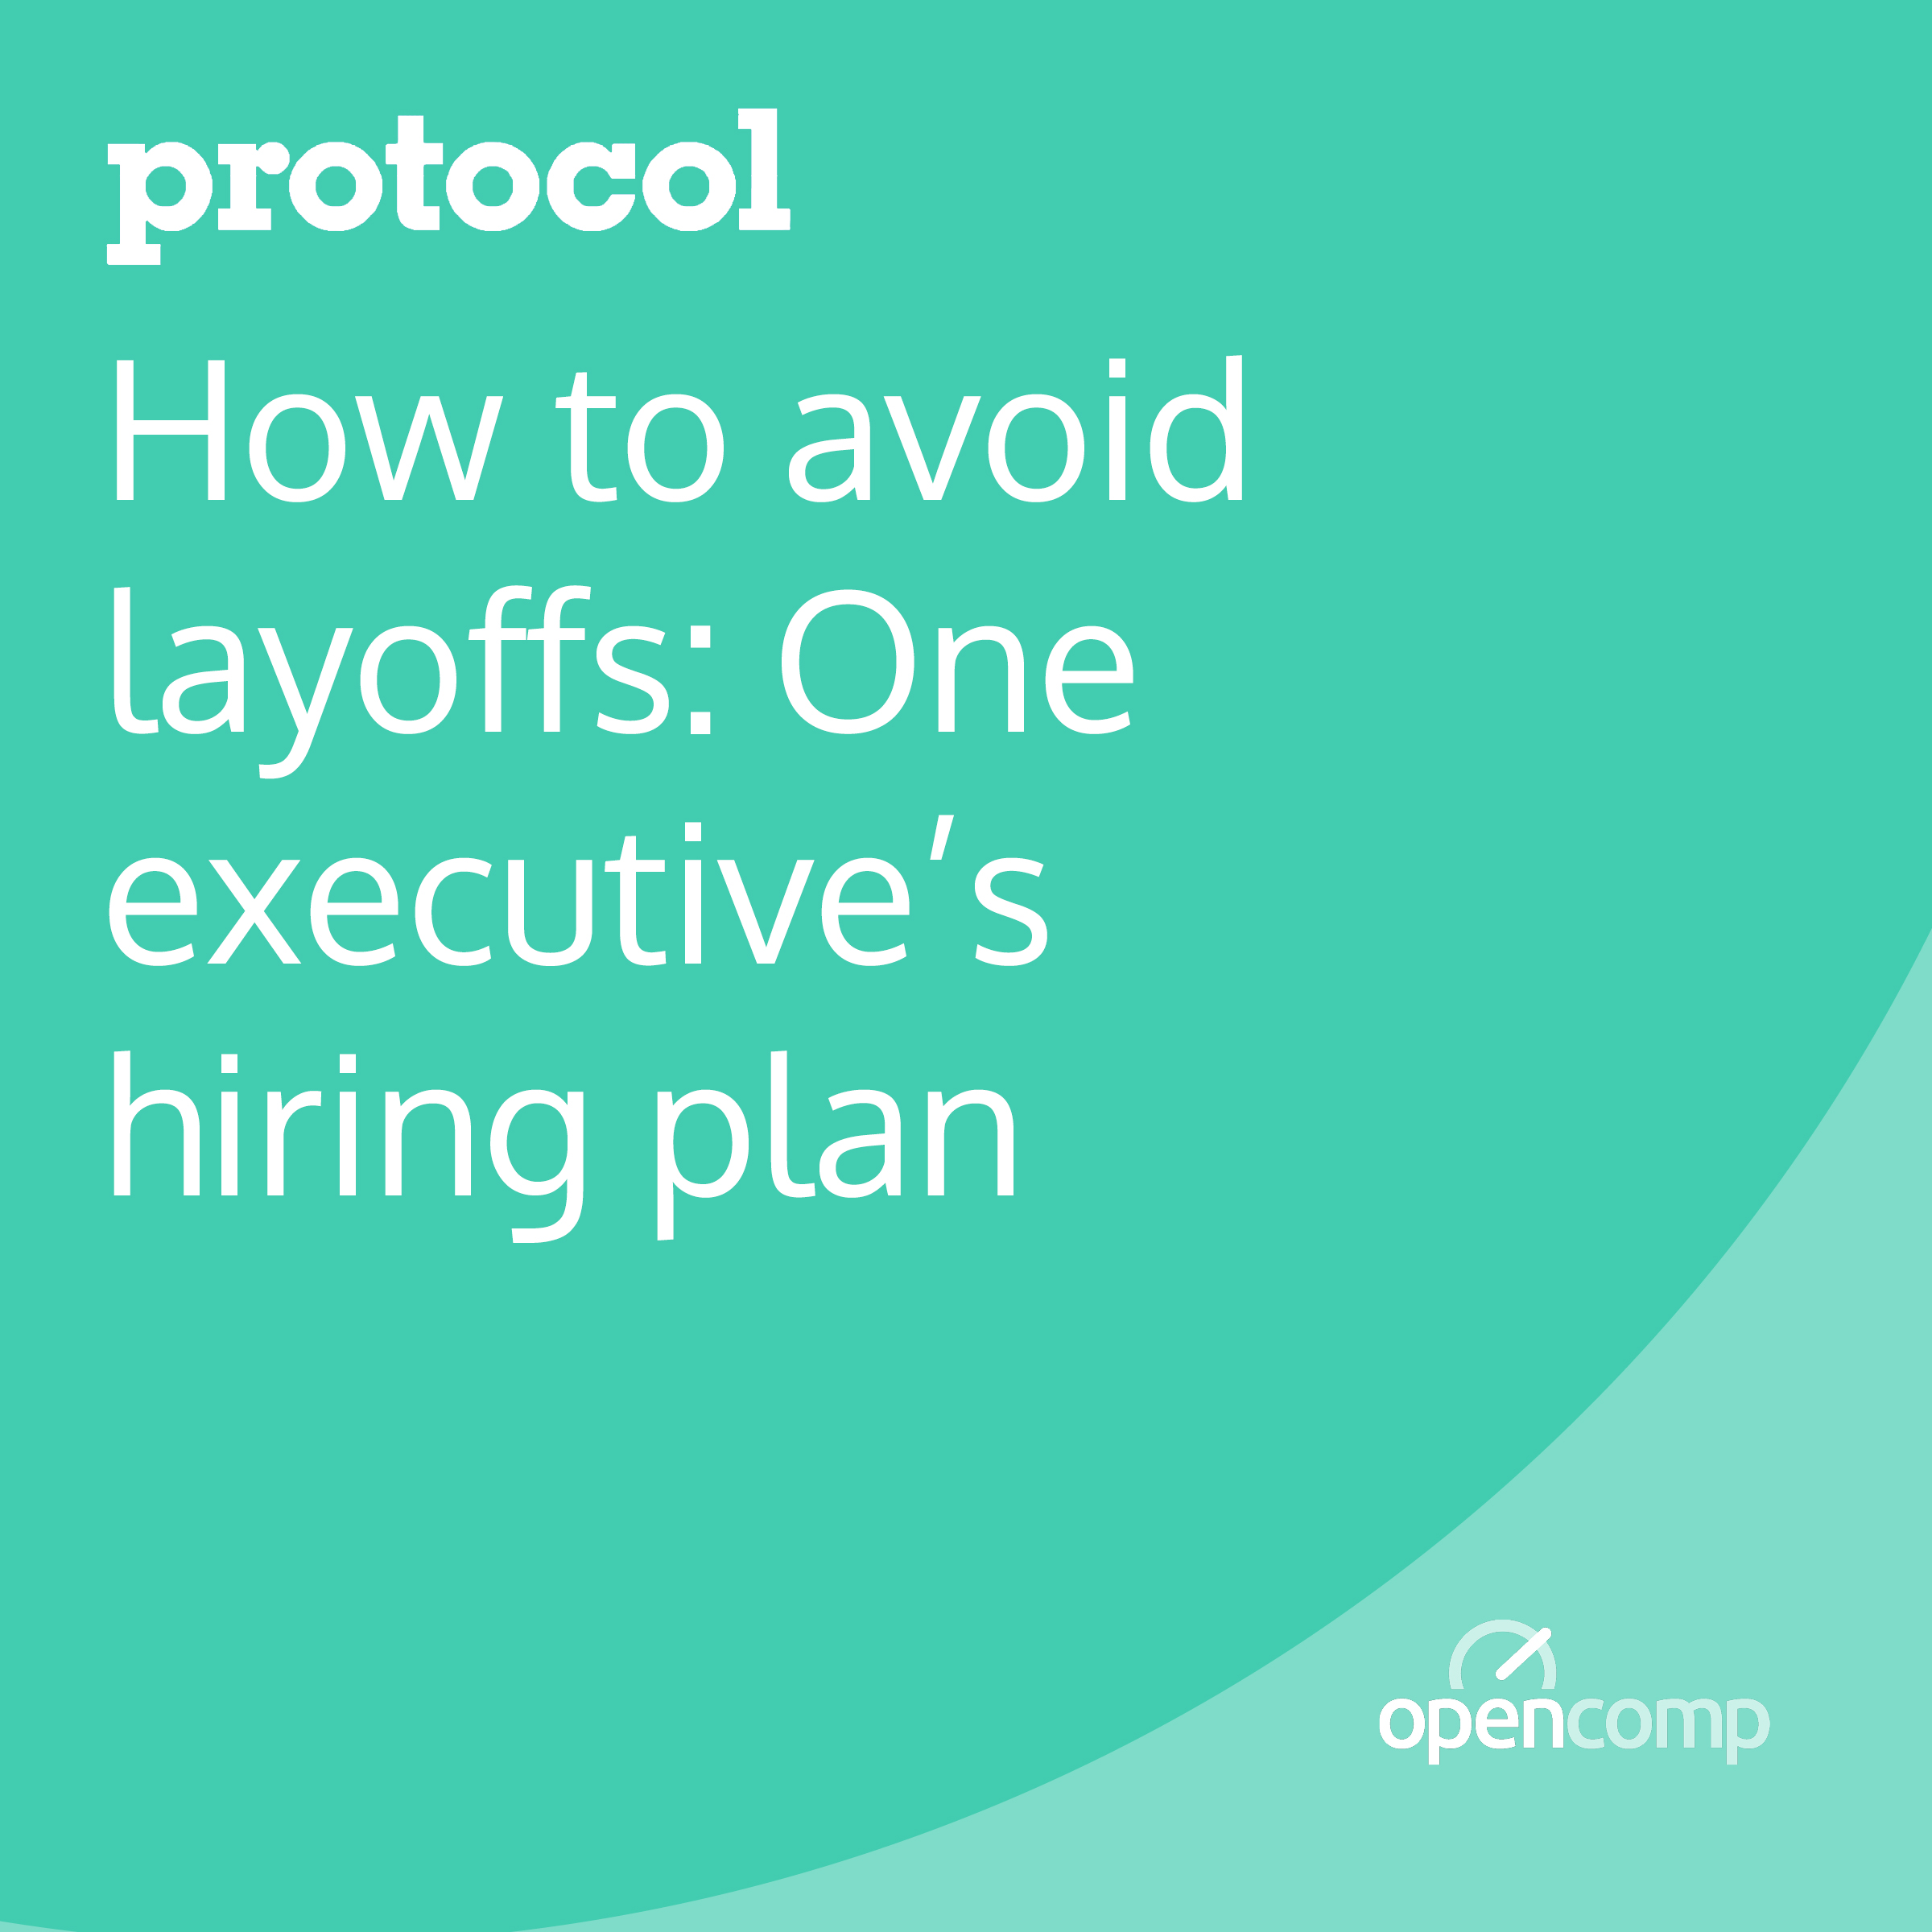 Protocol: How to avoid layoffs: One executive's hiring plan